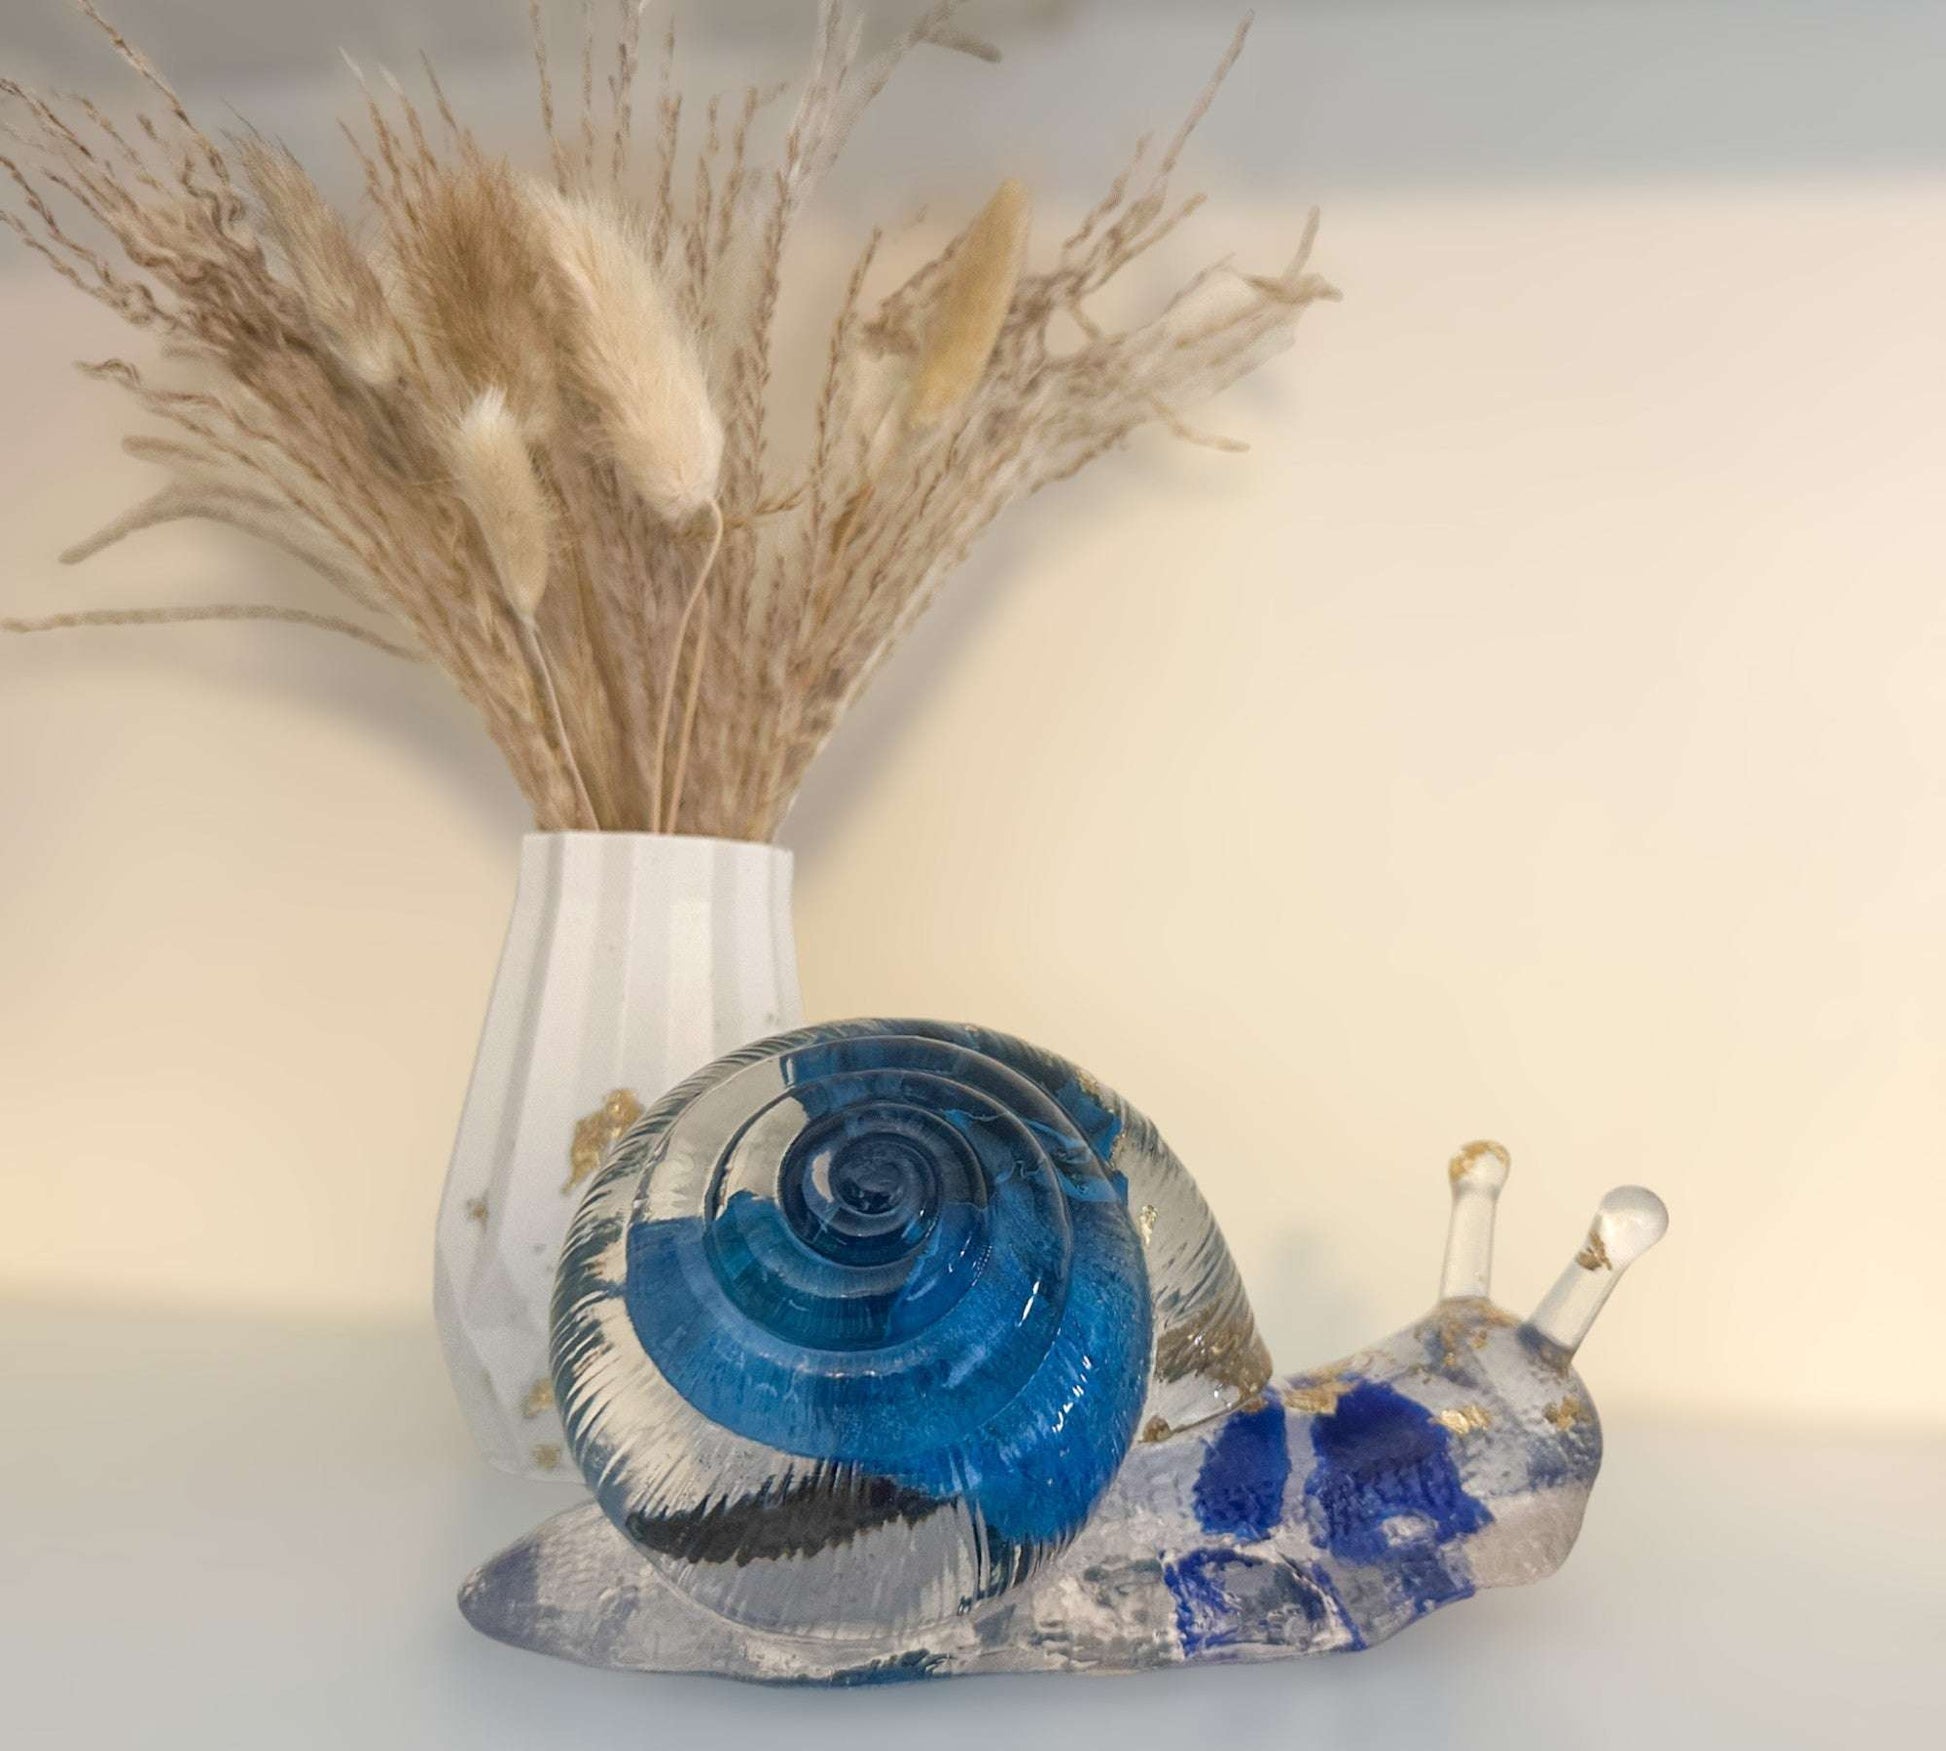 Blue Rose Bloom Snail - Handmade Resin Snail with Dried Blue Rose